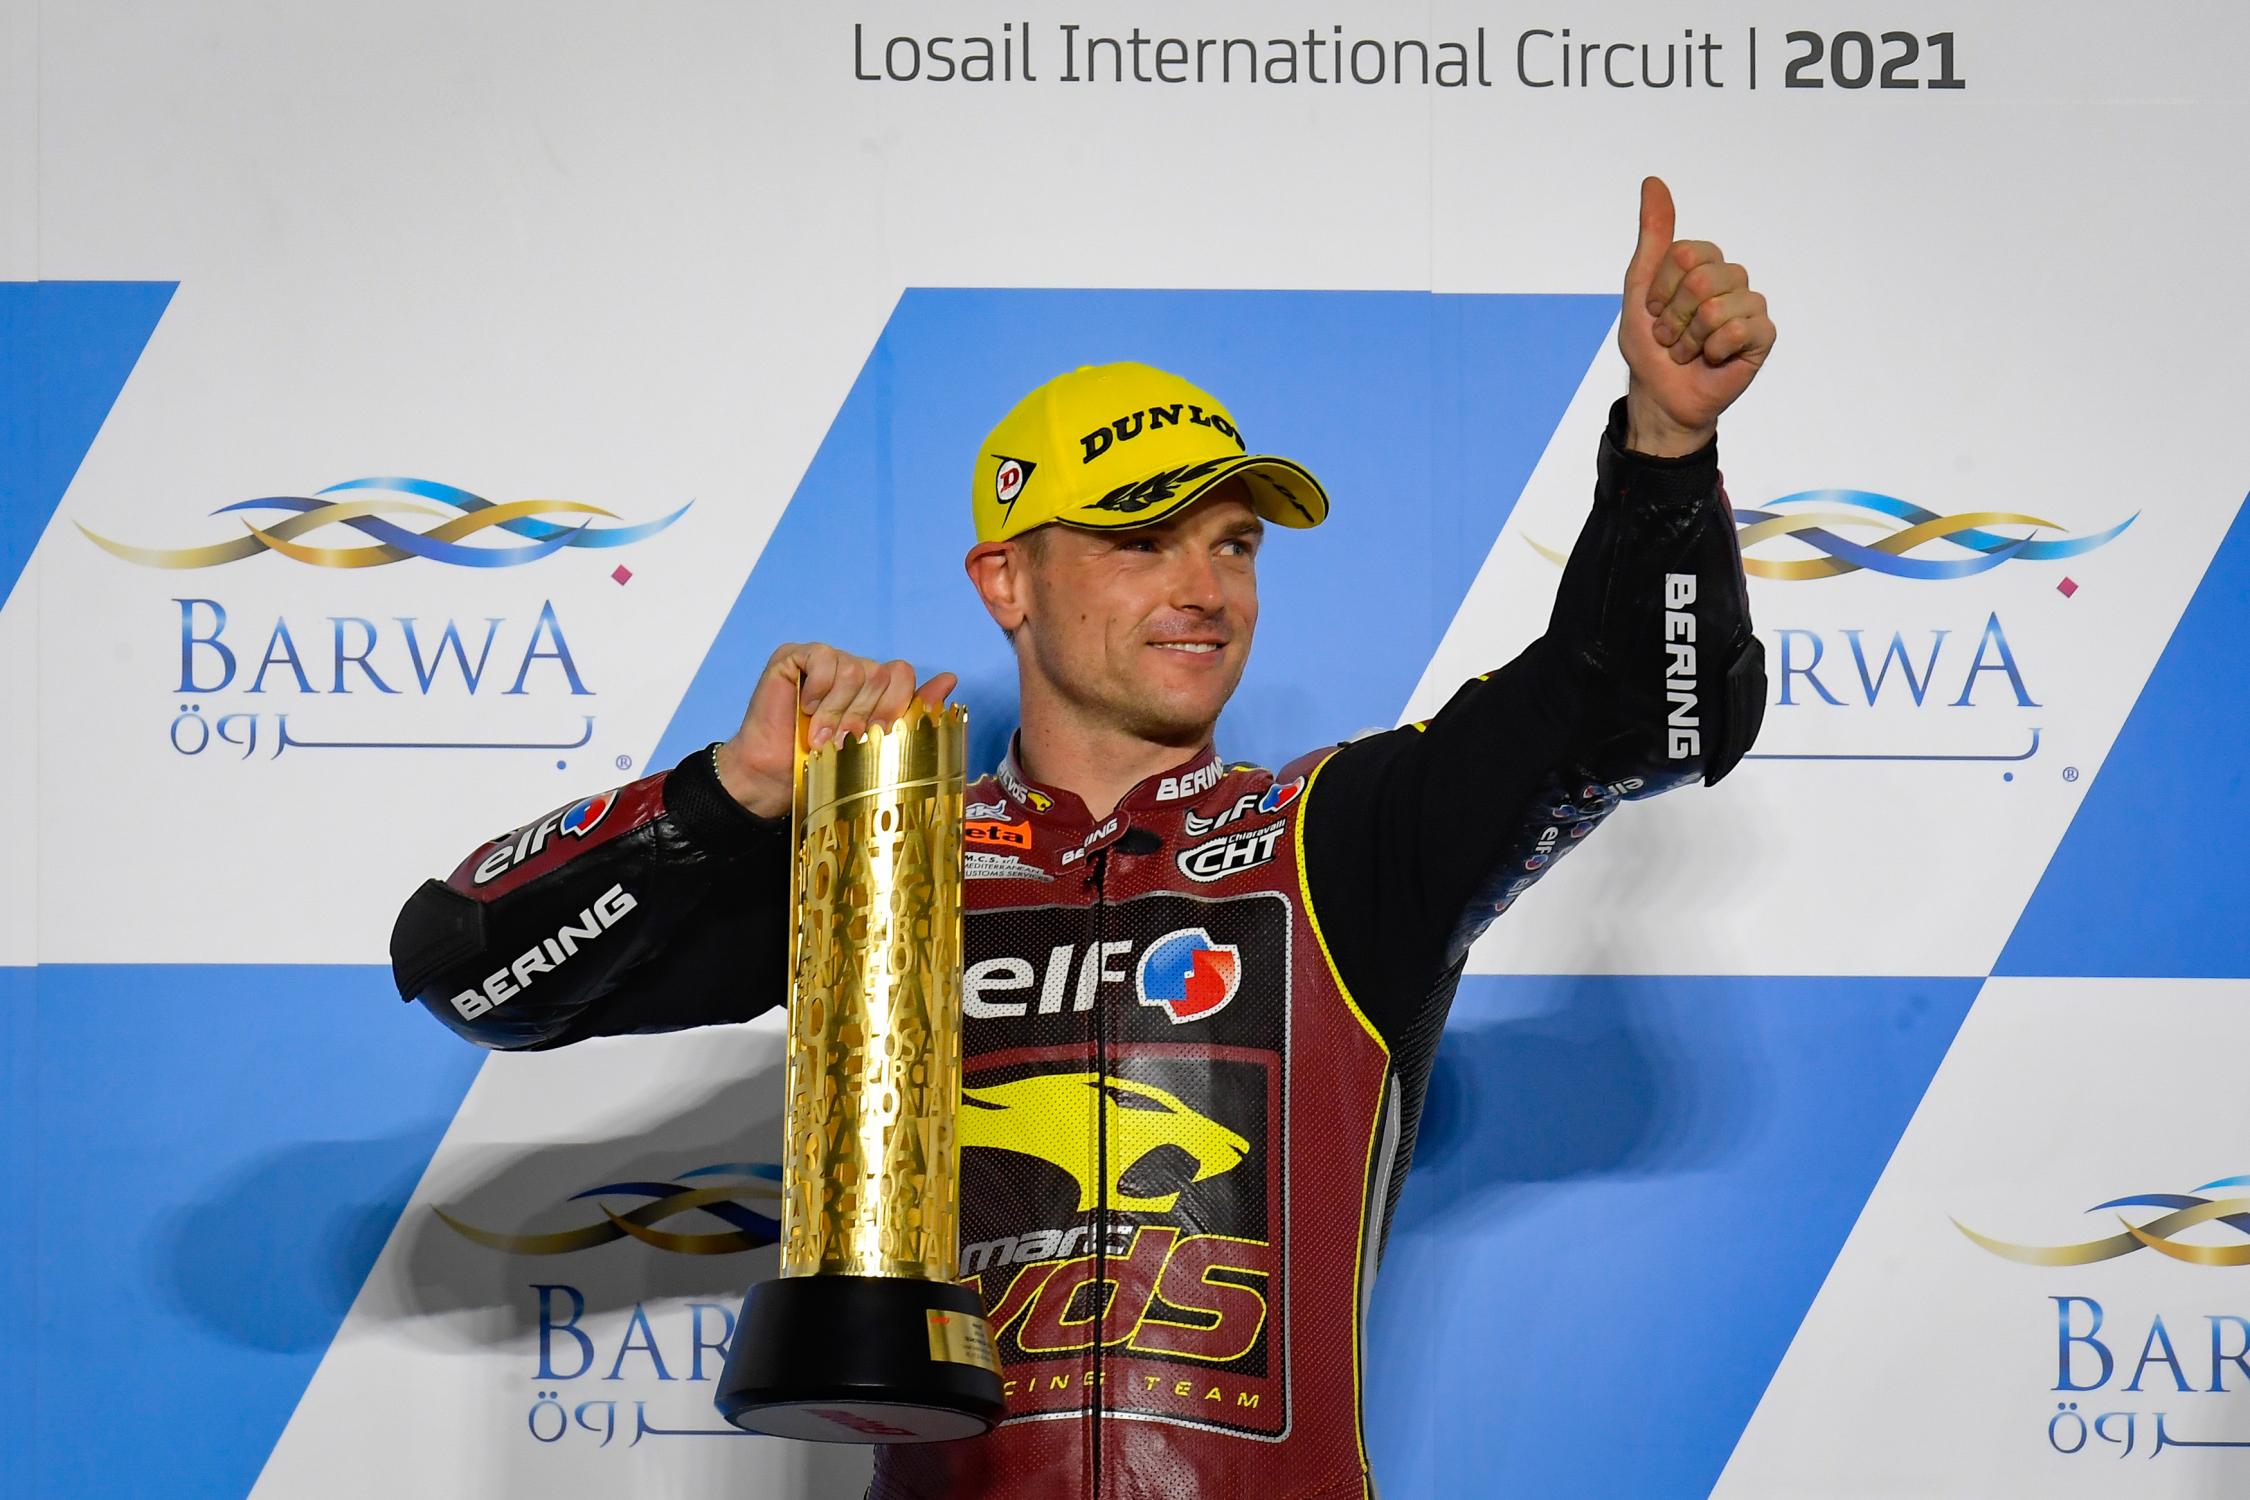 Featured image for “Moto 2: Sam Lowes Looks to Take a Double Win at the Losail International Circuit at the Doha Grand Prix”